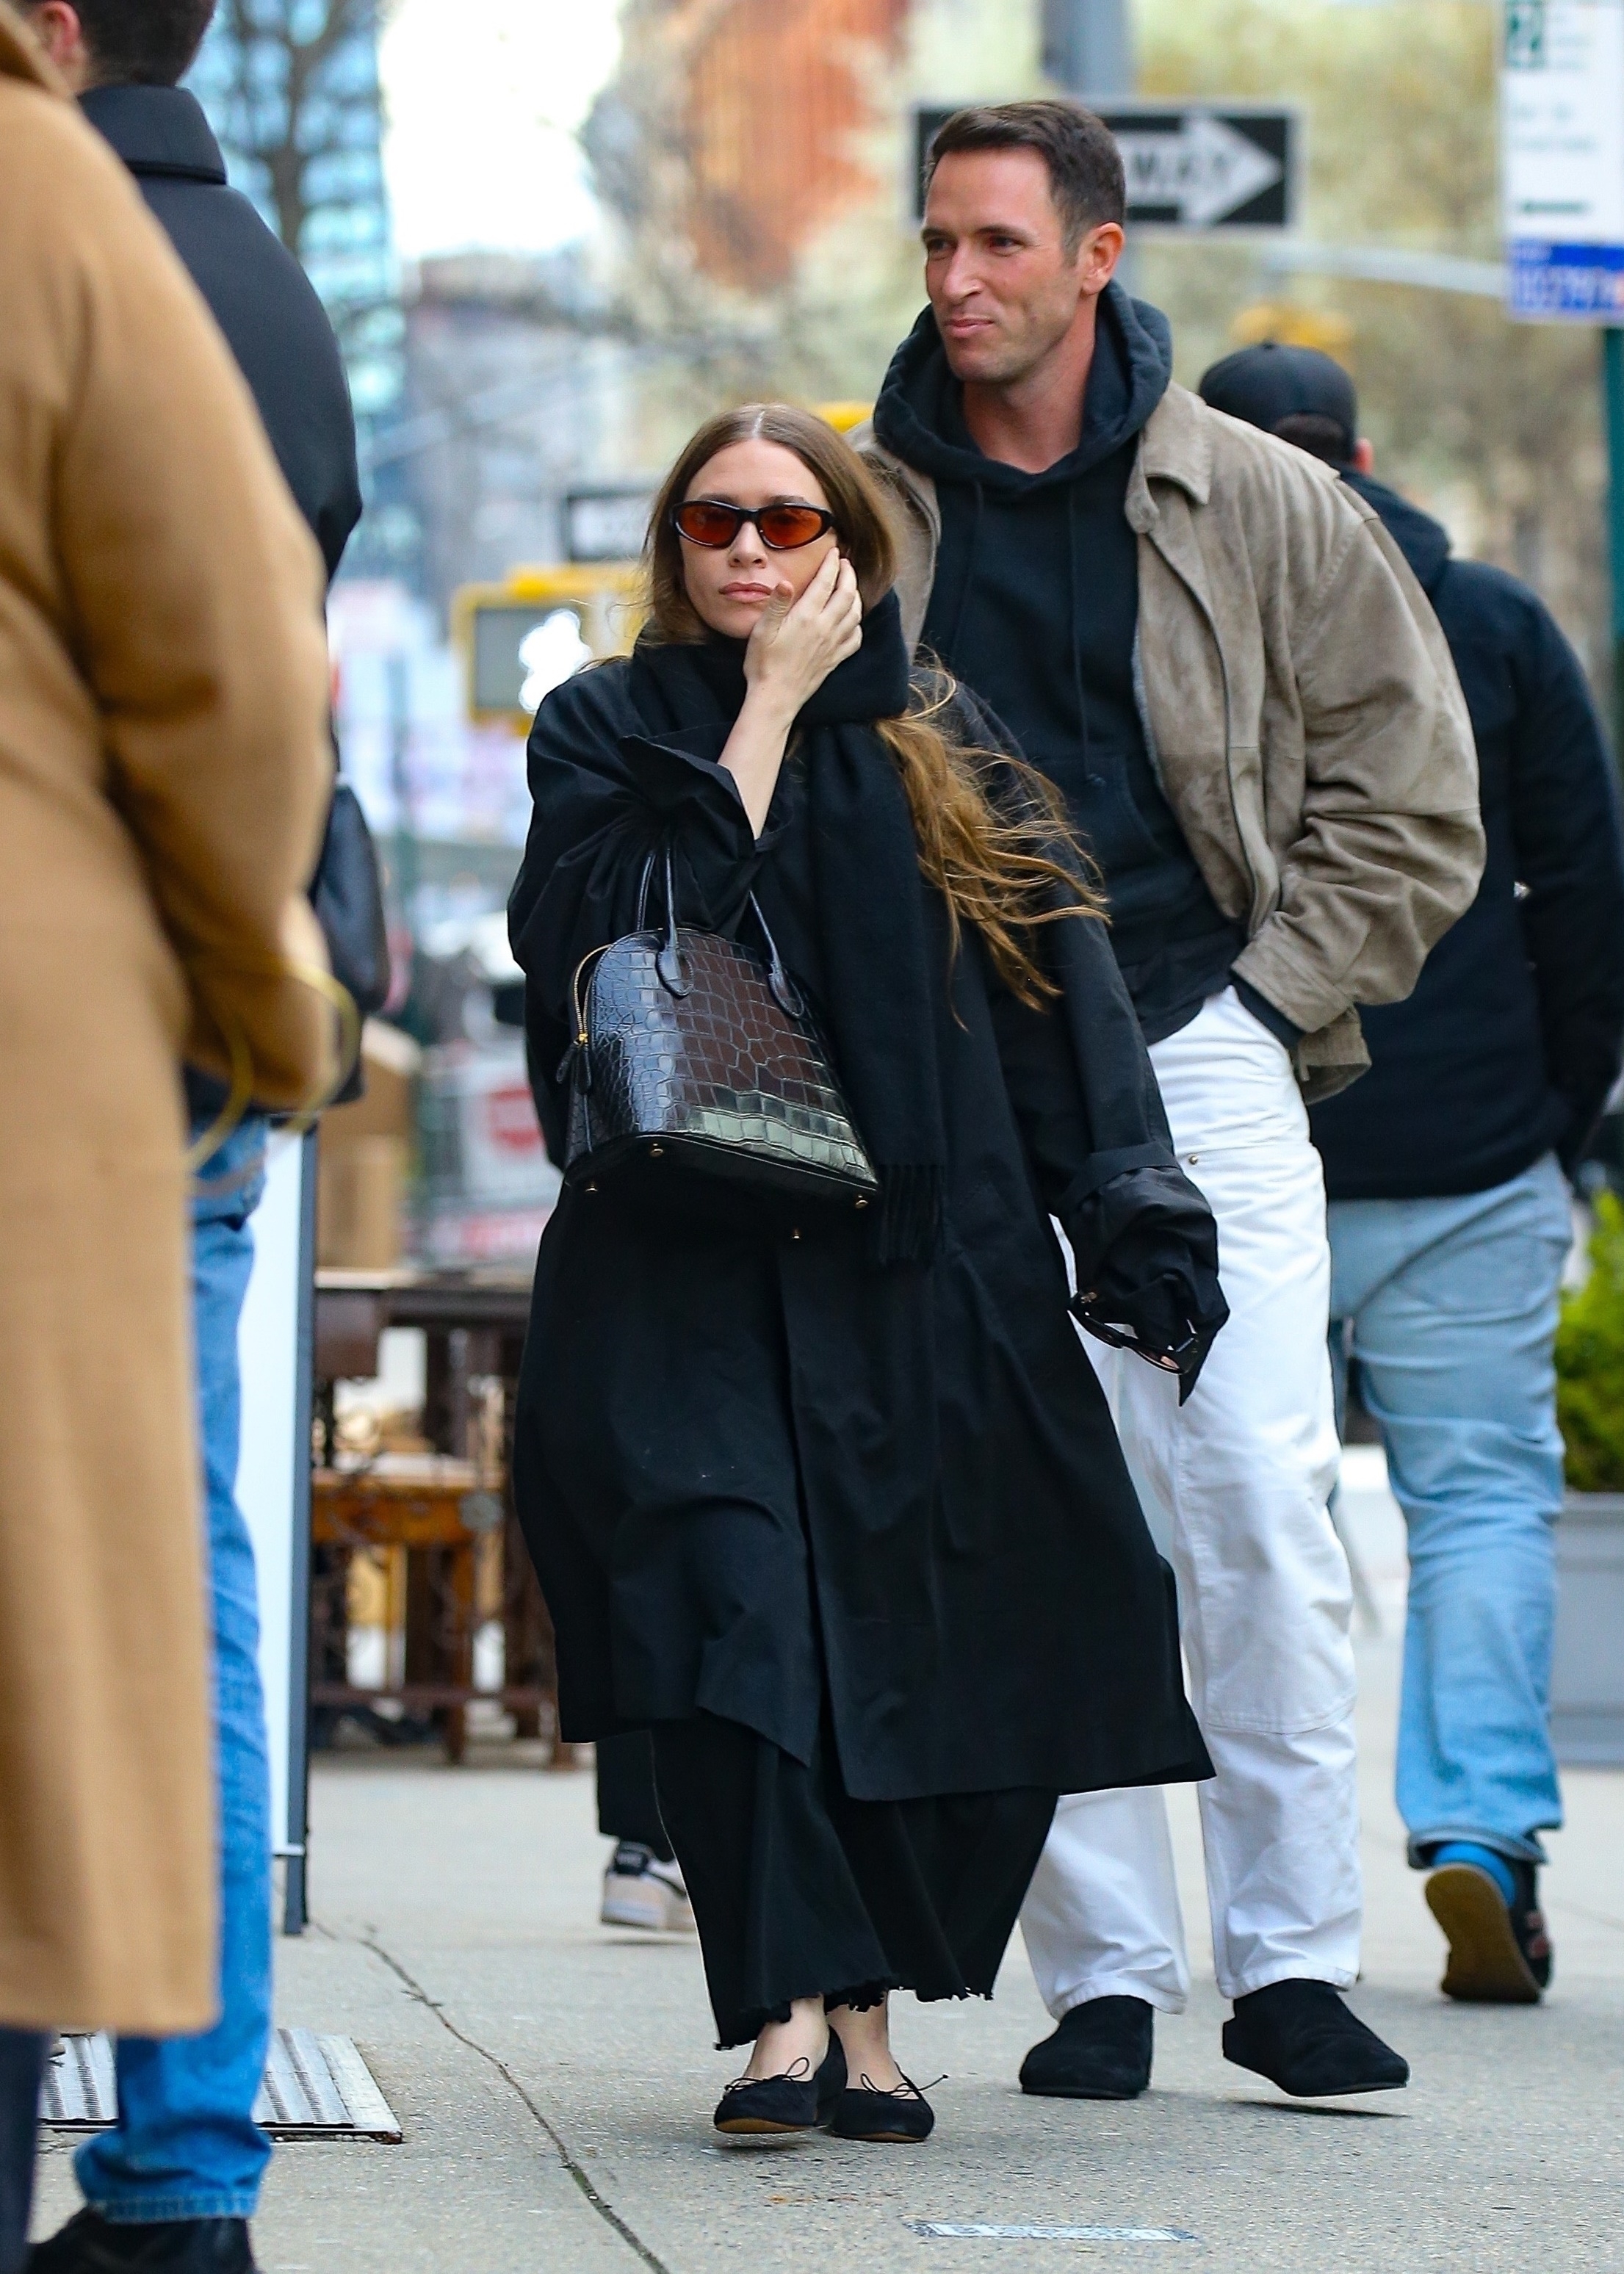 Ashley Olsen, in an all-black outfit and The Row Lady Bag, and Nicolas Turko walking in New York City